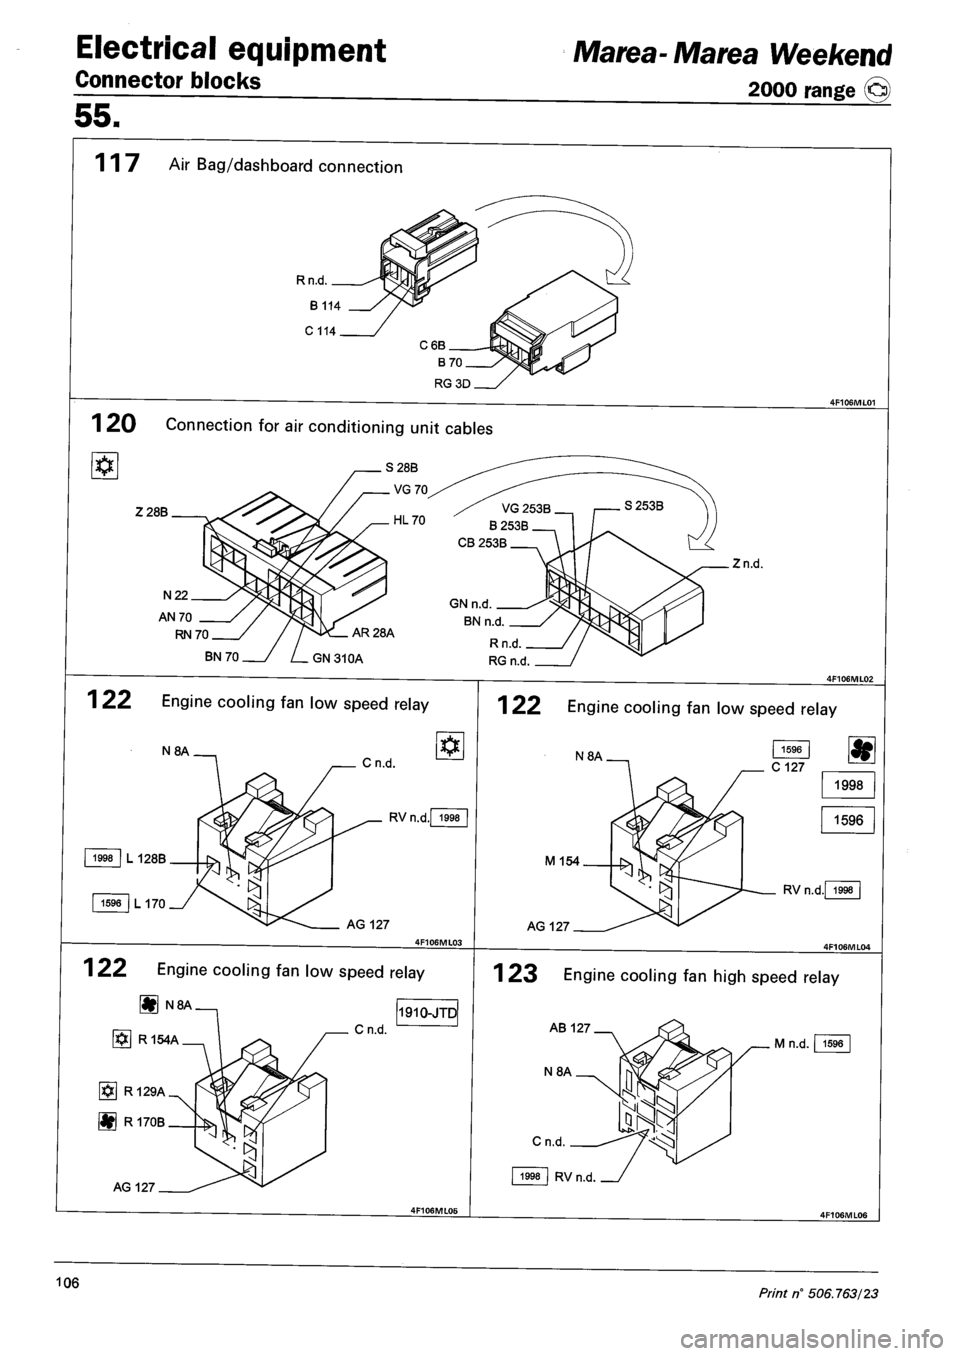 FIAT MAREA 2000 1.G Owners Guide Electrical equipment 
Connector blocks 
Marea- Marea Weekend 
2000 range © 
55. 
117 Air Bag/dashboard connection 
Rn.d 
1 20 Connection for air conditioning unit cables 
Z28B 
Zn.d. 
N22 
AN 70 
RN 